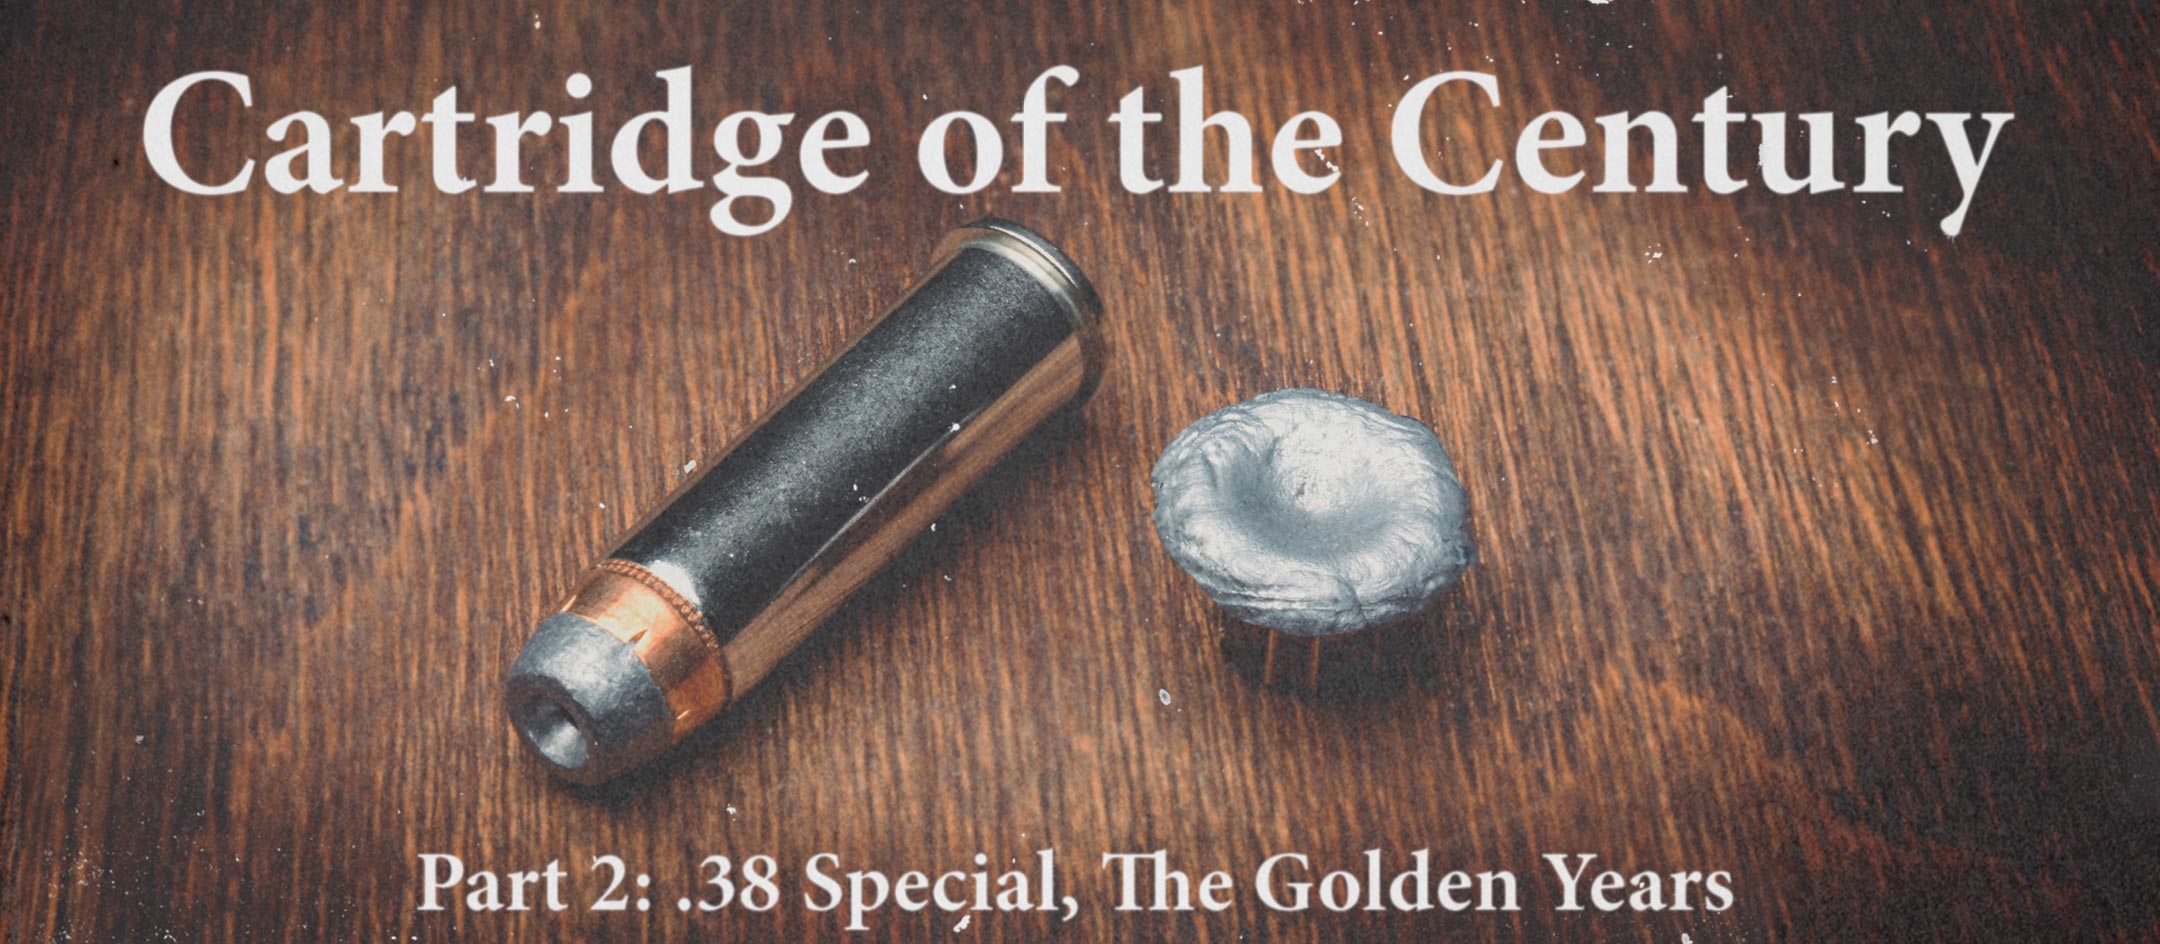 Cartridge Of The Cenutry Part 2 38 Special The Golden Years